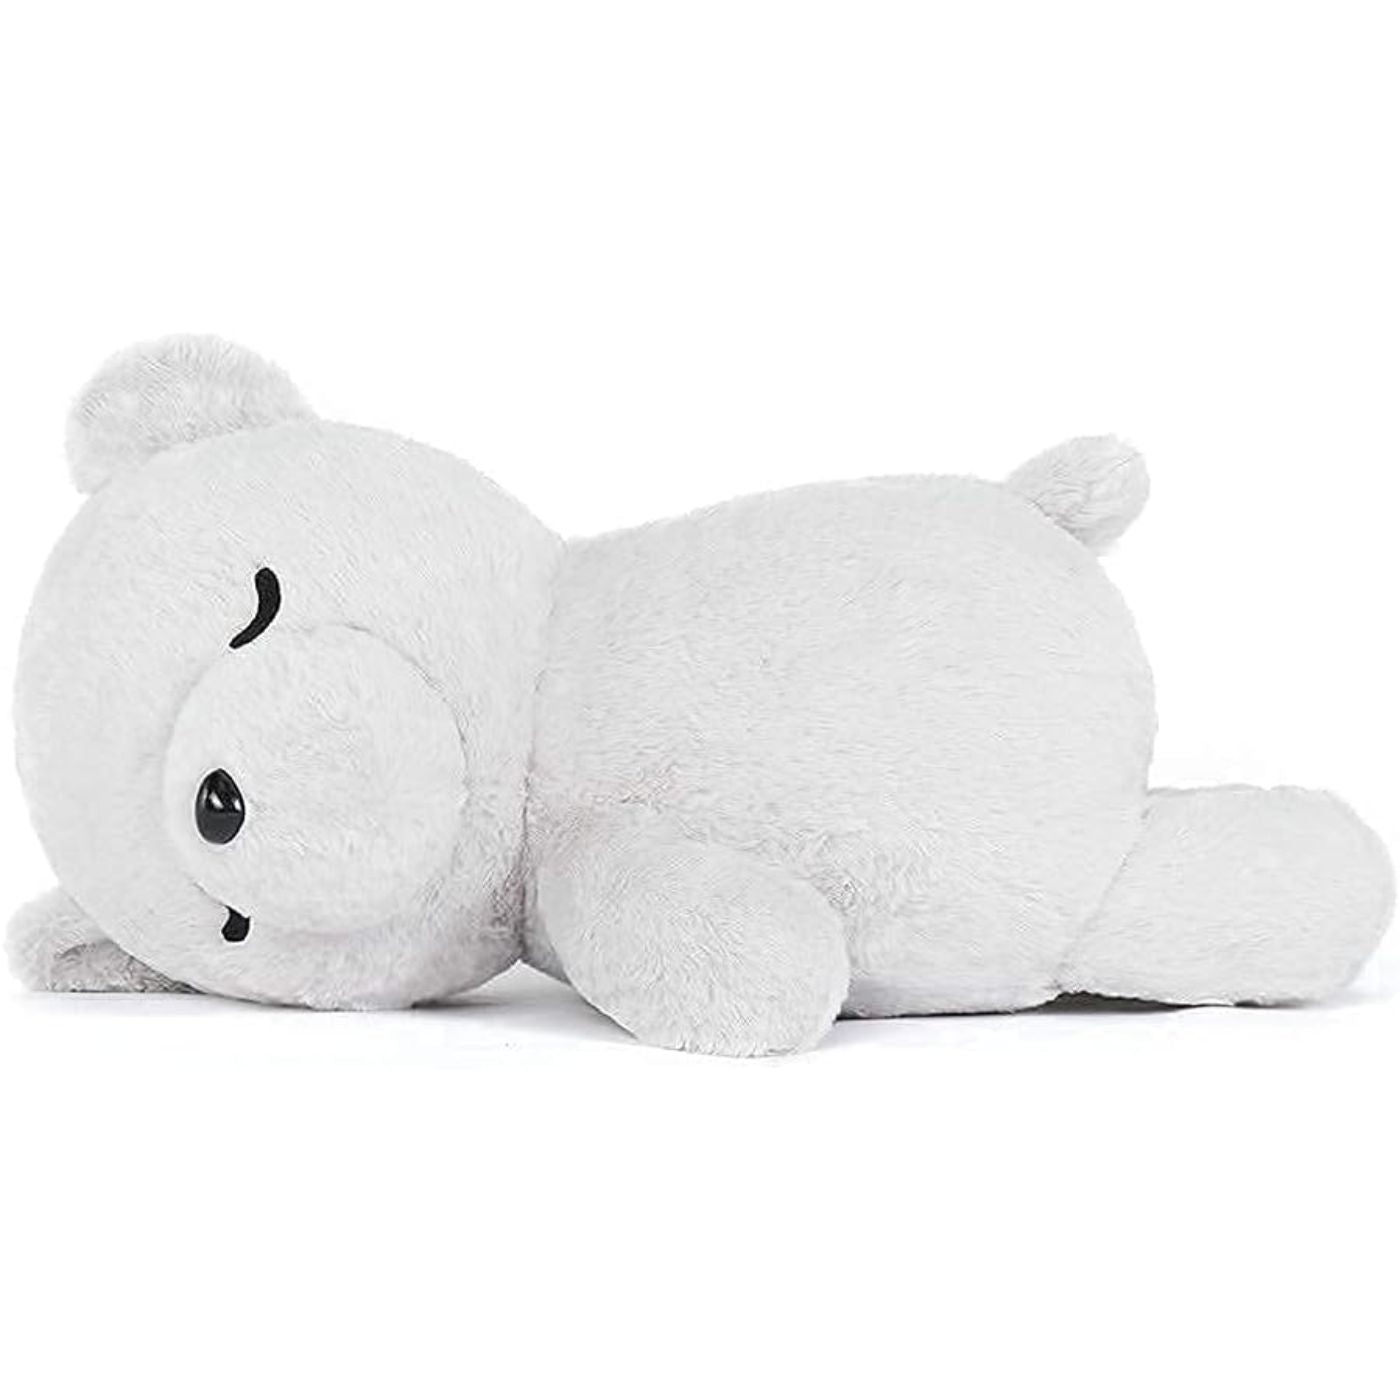 Sleeping Bear Plush Toy, Multicolor, 20 Inches